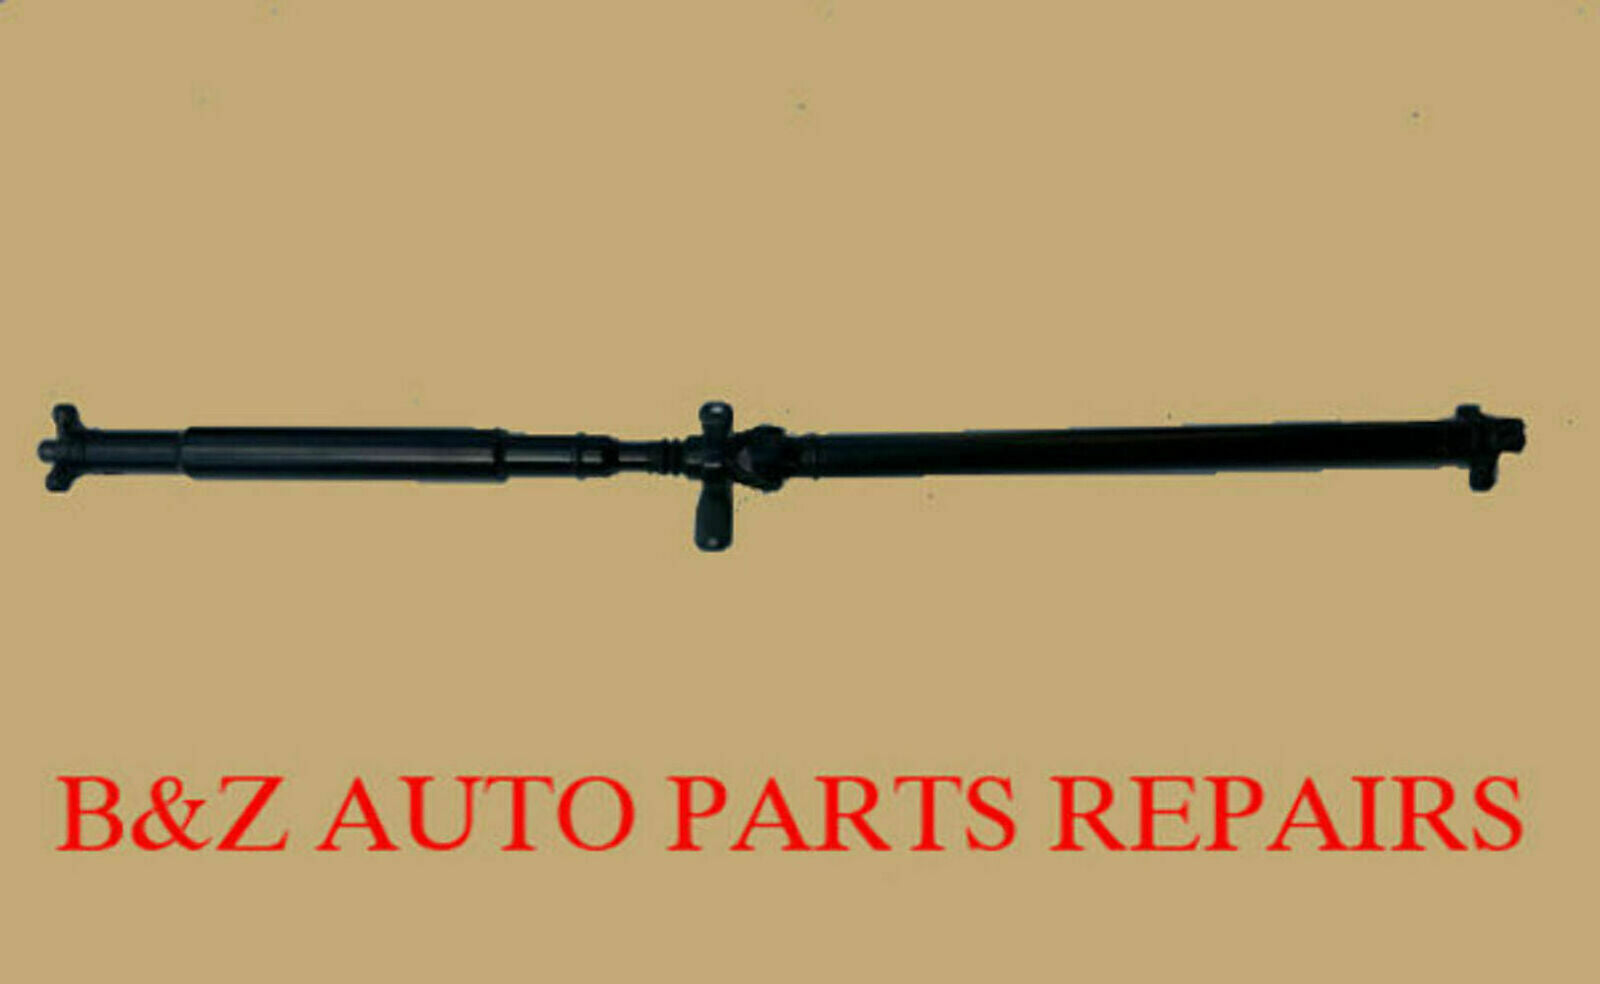 Holden Commodore VZ SV6 Manual Sedan Reconditioned Tailshaft | B & Z Tailshafts